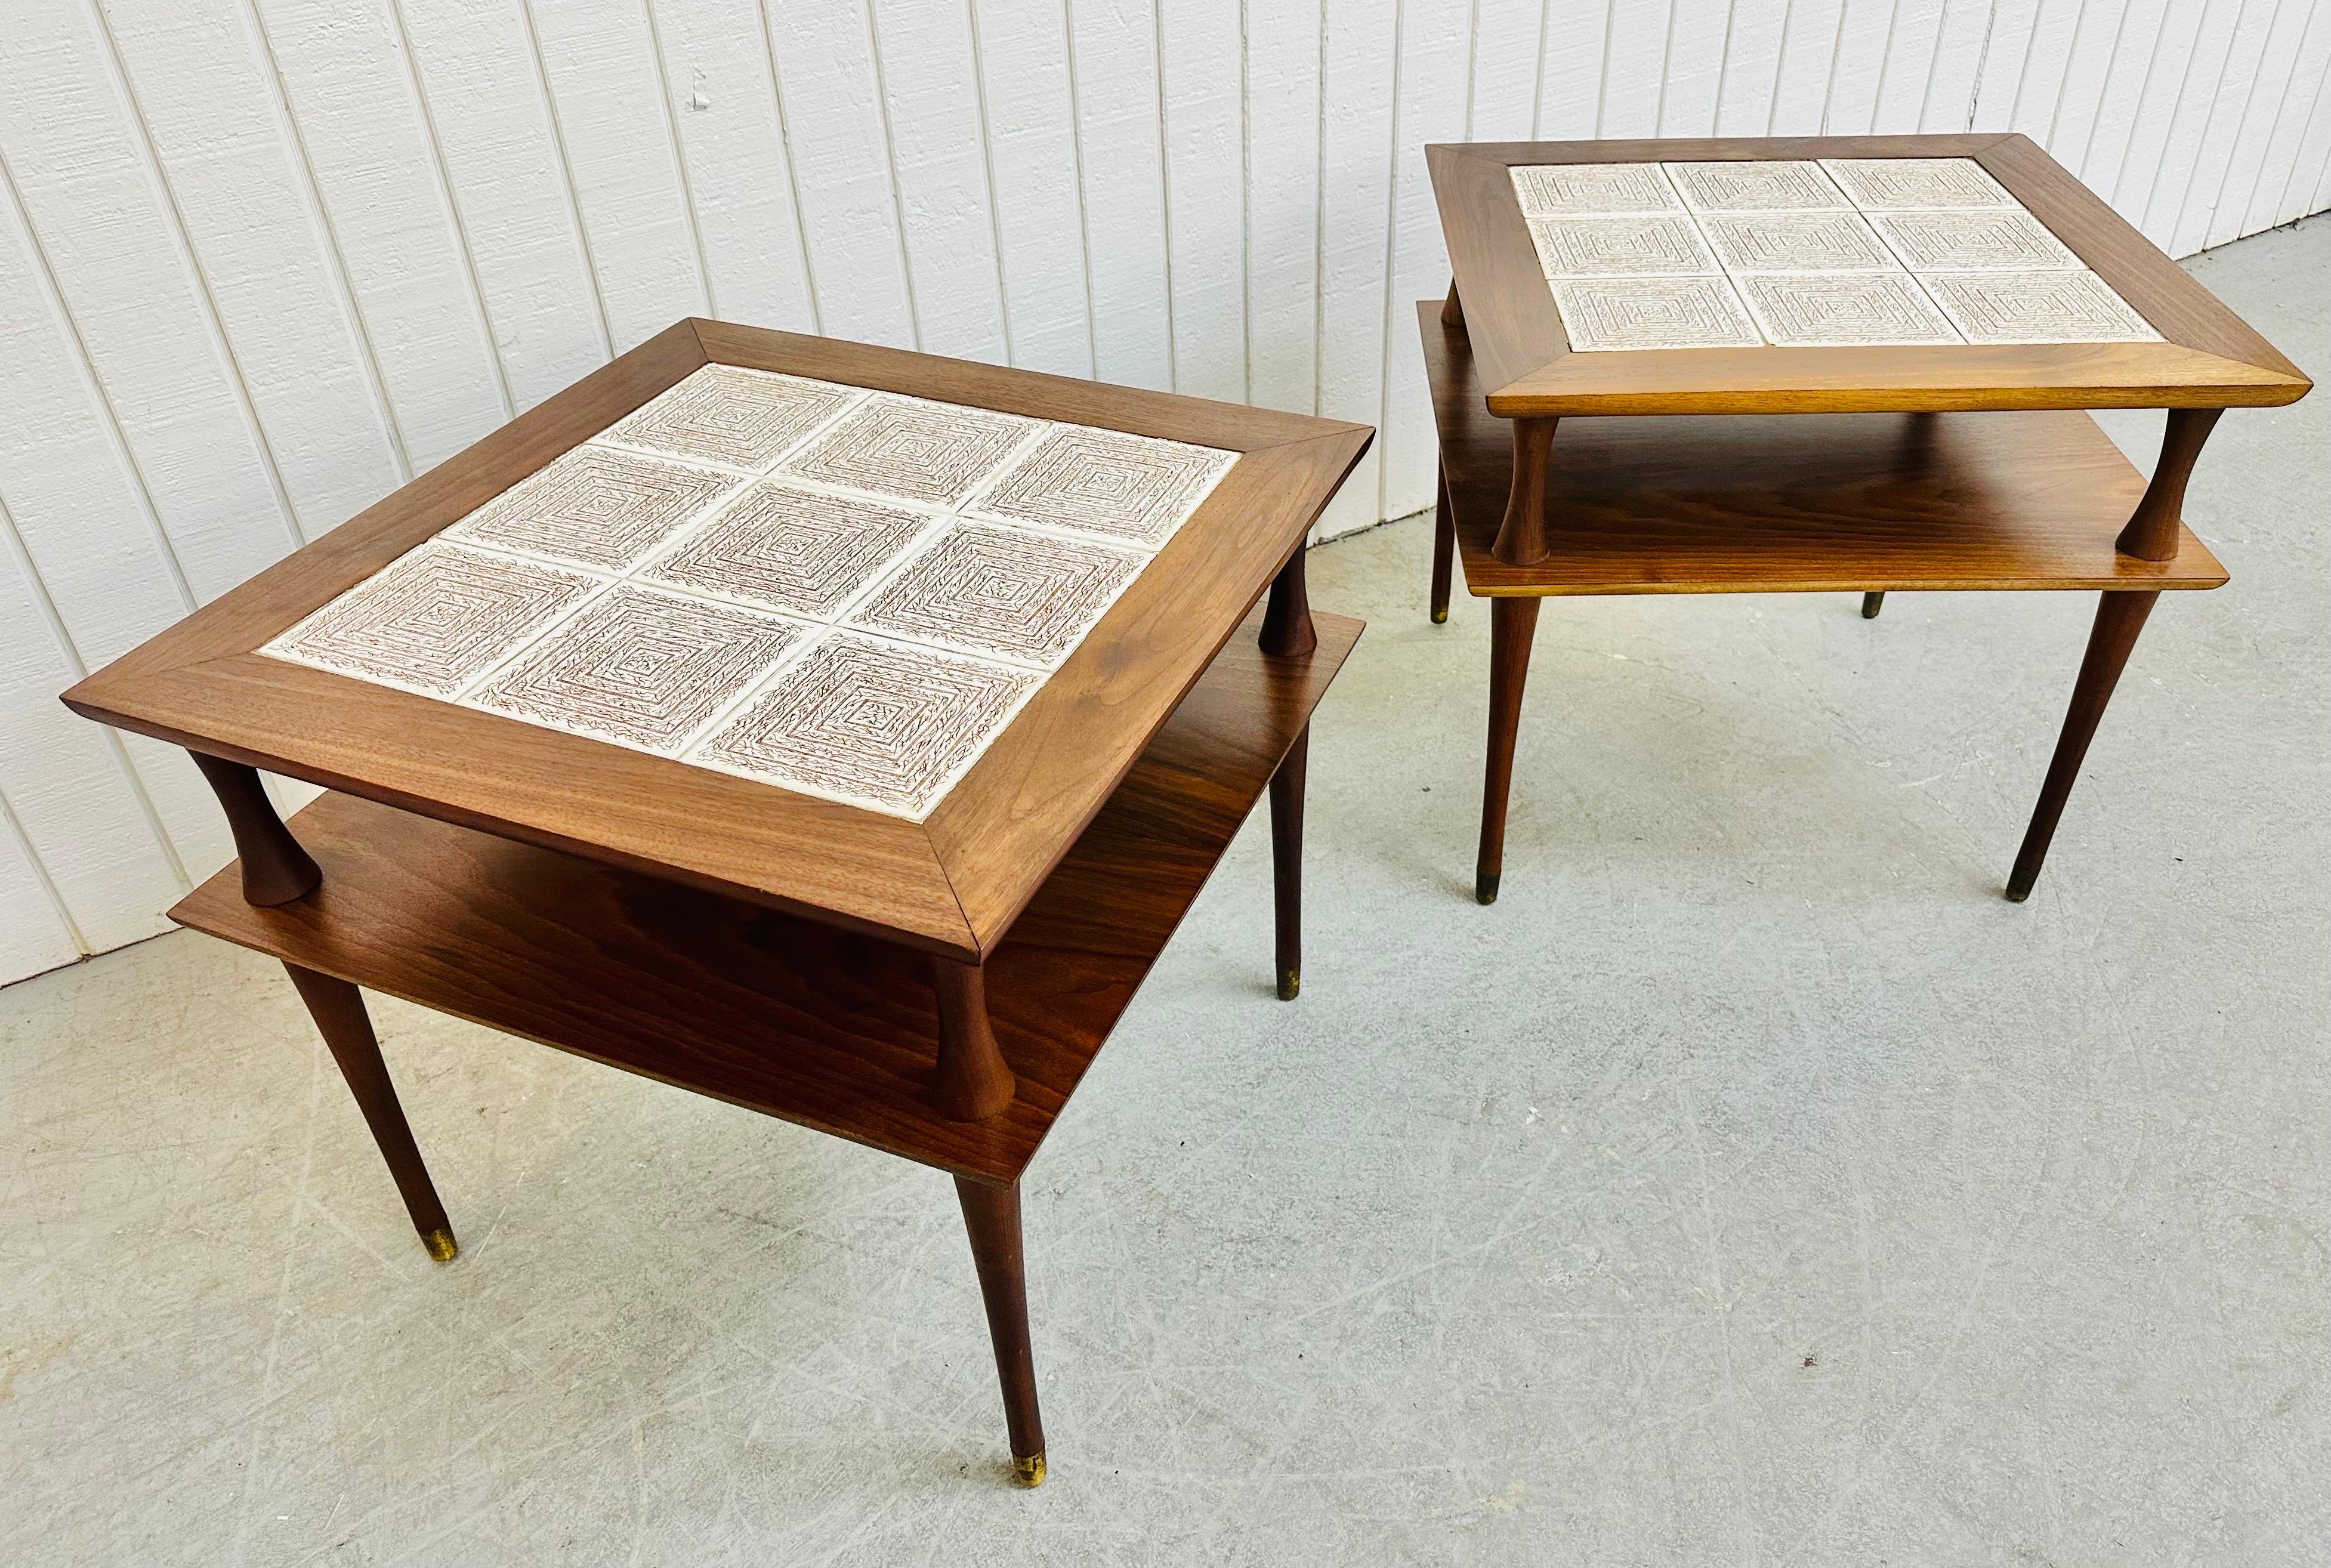 20th Century Mid-Century Modern Walnut Tile Top Side Tables - Set of 2 For Sale